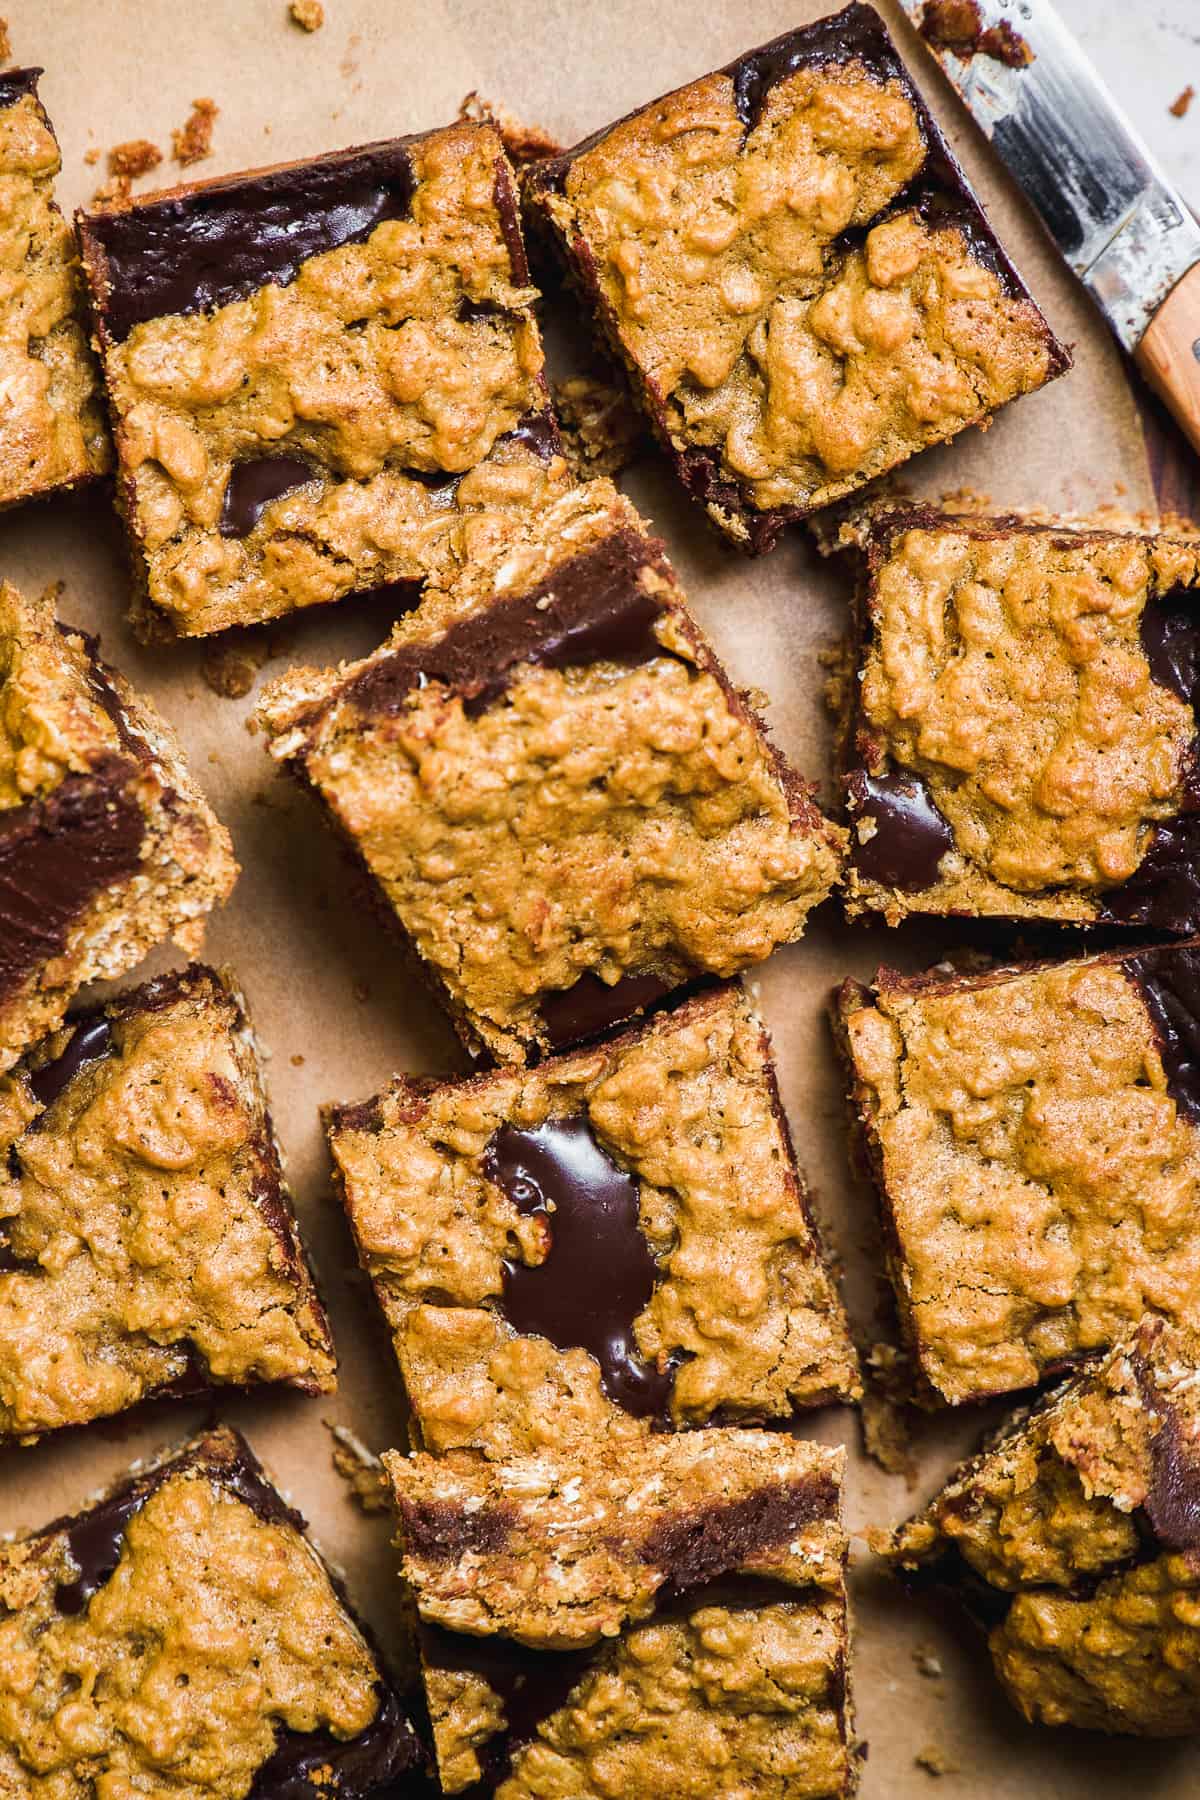 Oatmeal fudge bars scattered on brown paper.